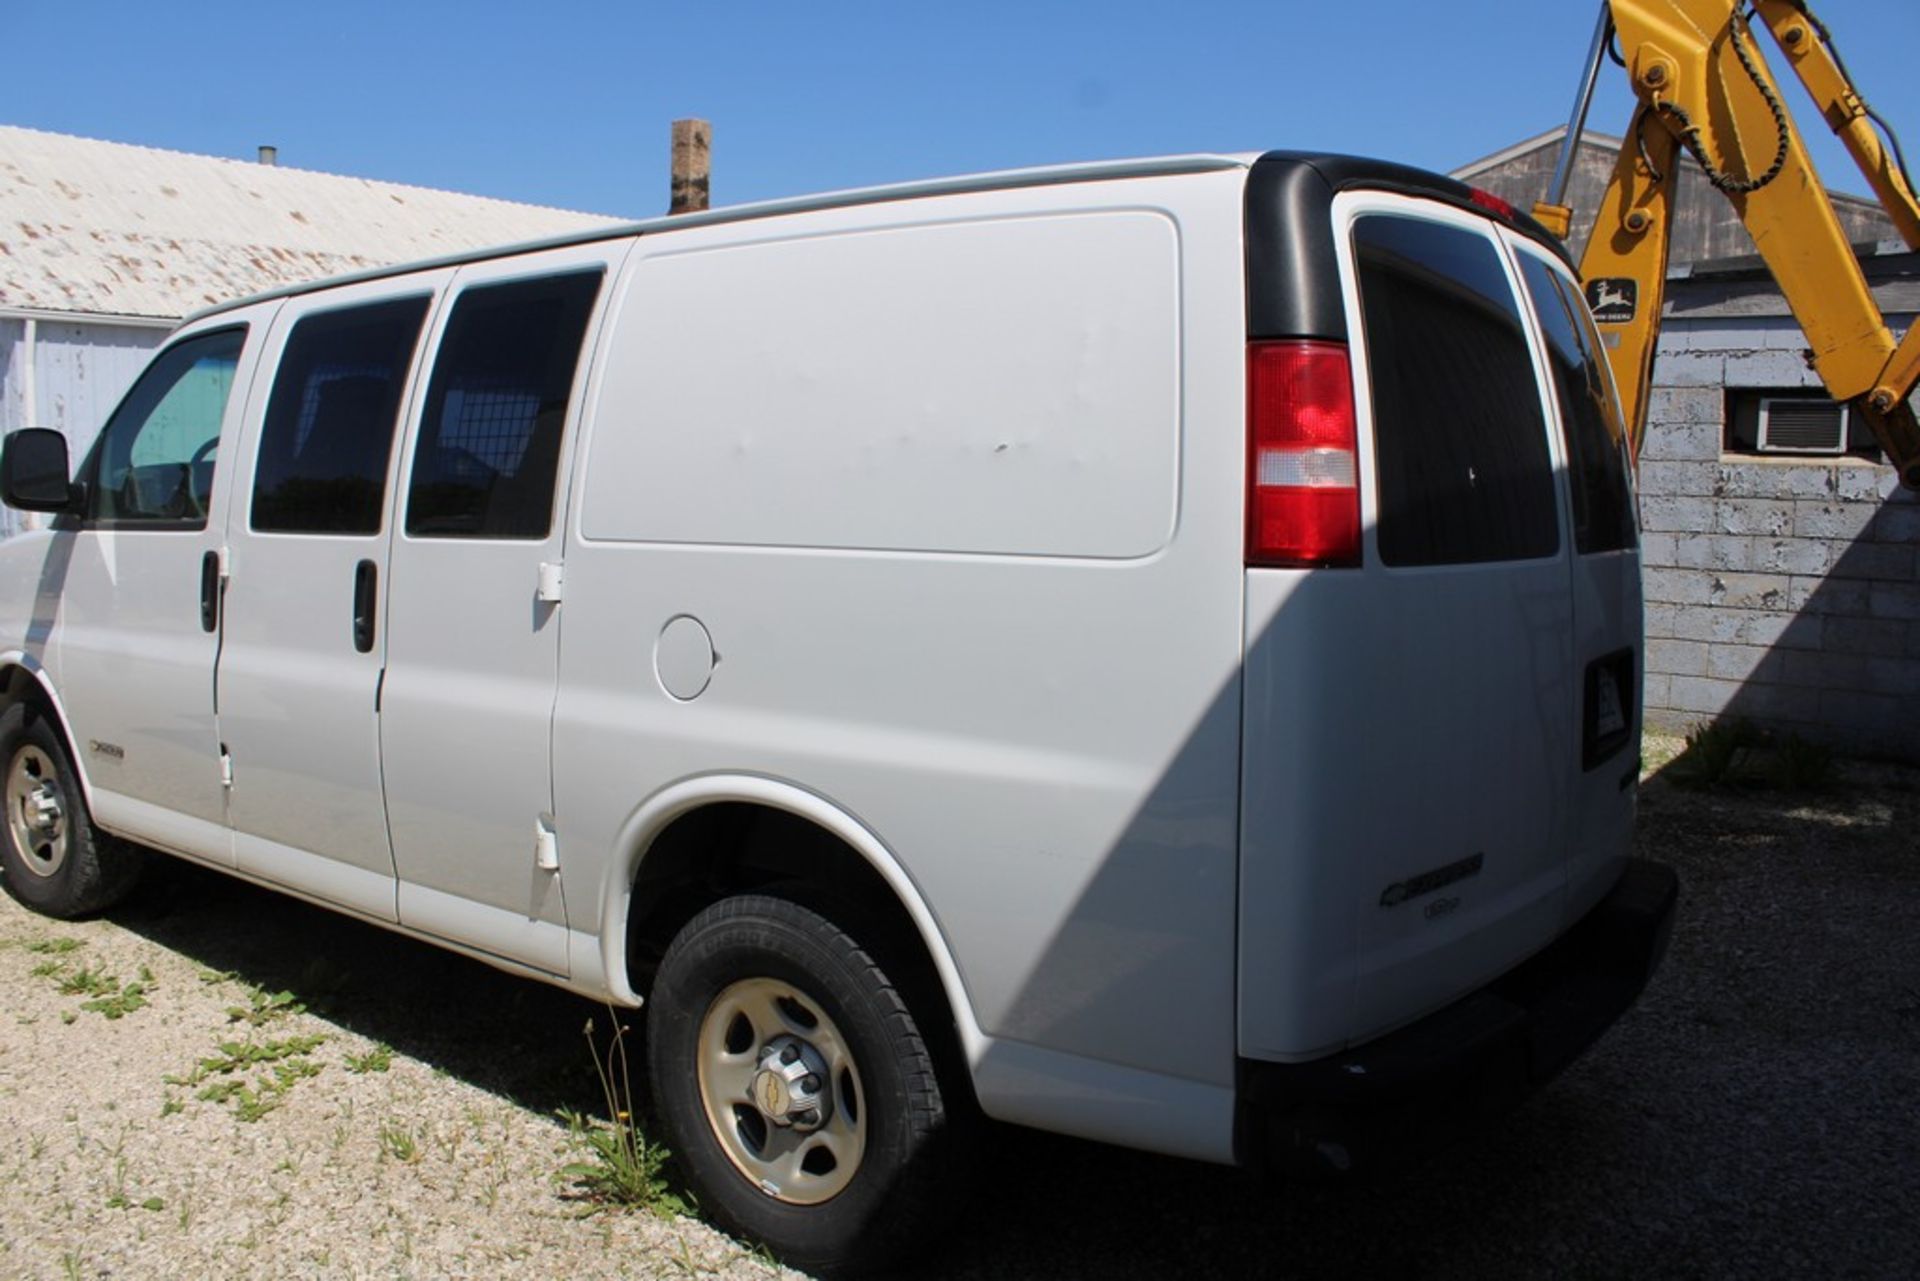 2003 CHEVROLET MODEL 2500 CARGO VAN, VIN: 1GCFG25T131159094, AUTOMATIC TRANSMISSION, APPROX. 167,000 - Image 5 of 10